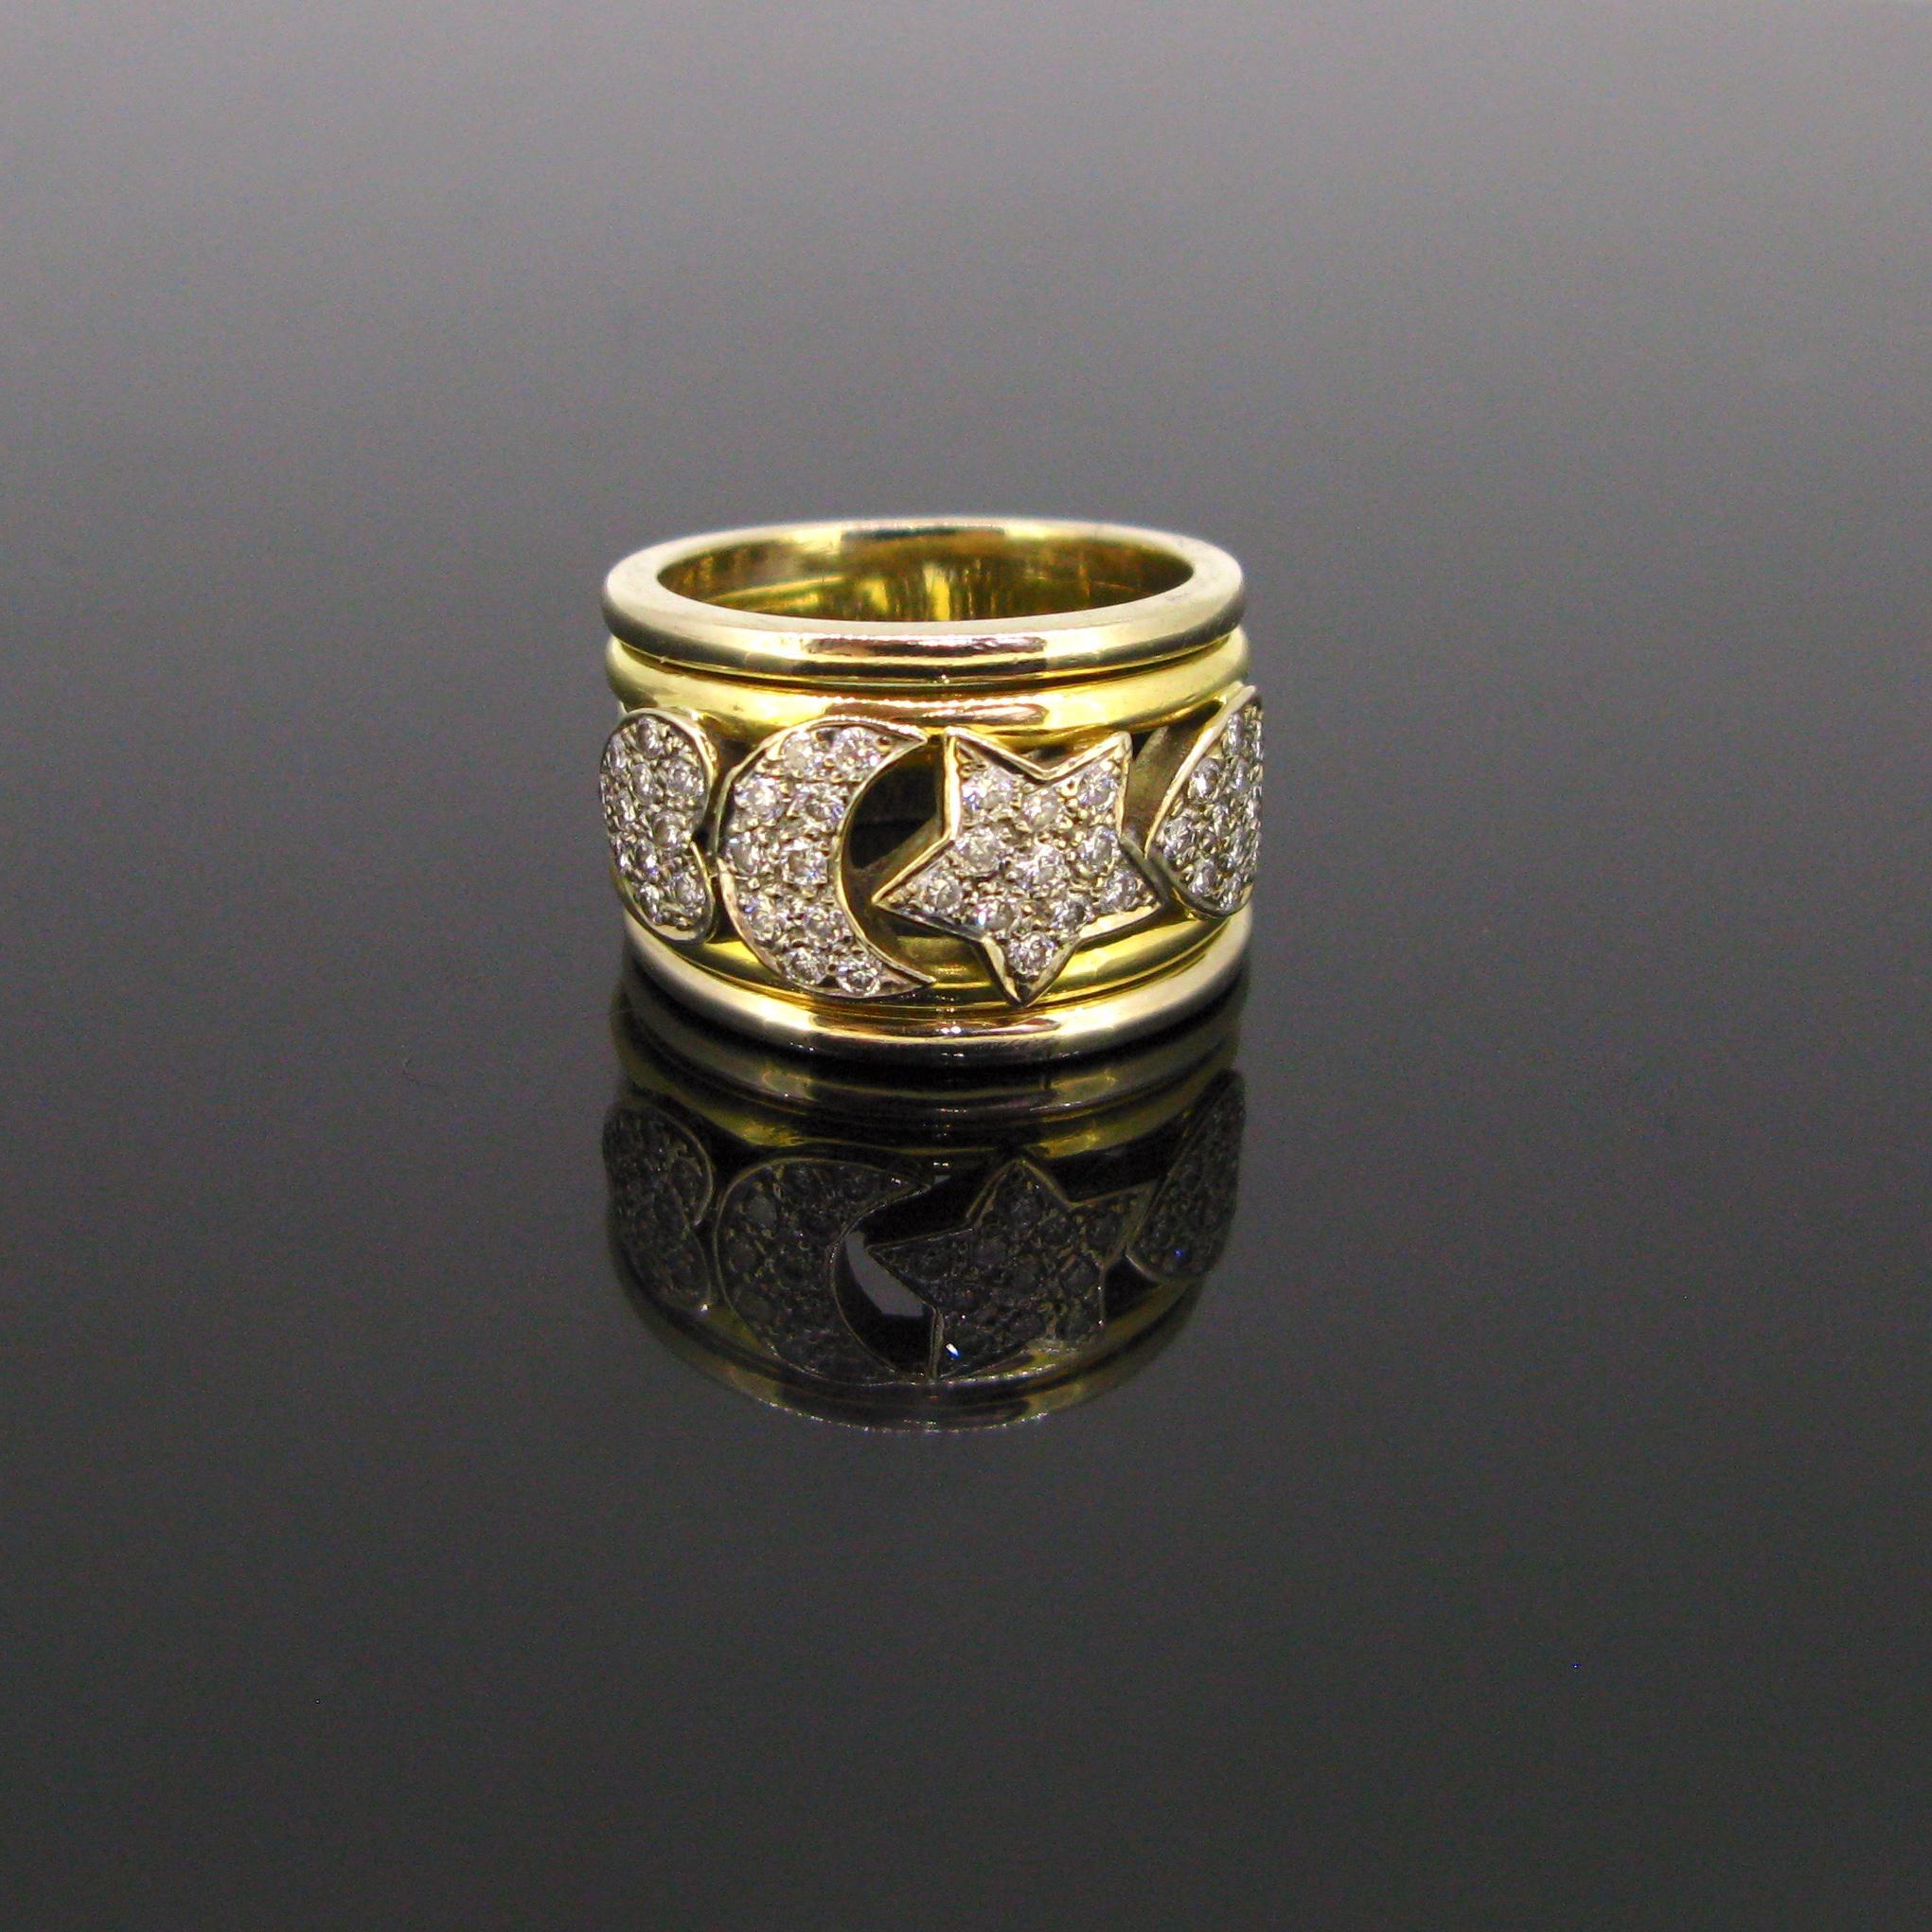 Weight:	16.95gr

Metal:	18kt yellow and white gold

Stones:	43 Diamonds
•	Cut:	Brilliant
•	Carat:	1ct approximately
•	Colour:	G/H
•	Clarity:	VS

Condition:	Very Good

Hallmarks:	750

Comments:	This vintage ring is made in 18kt white and yellow gold.